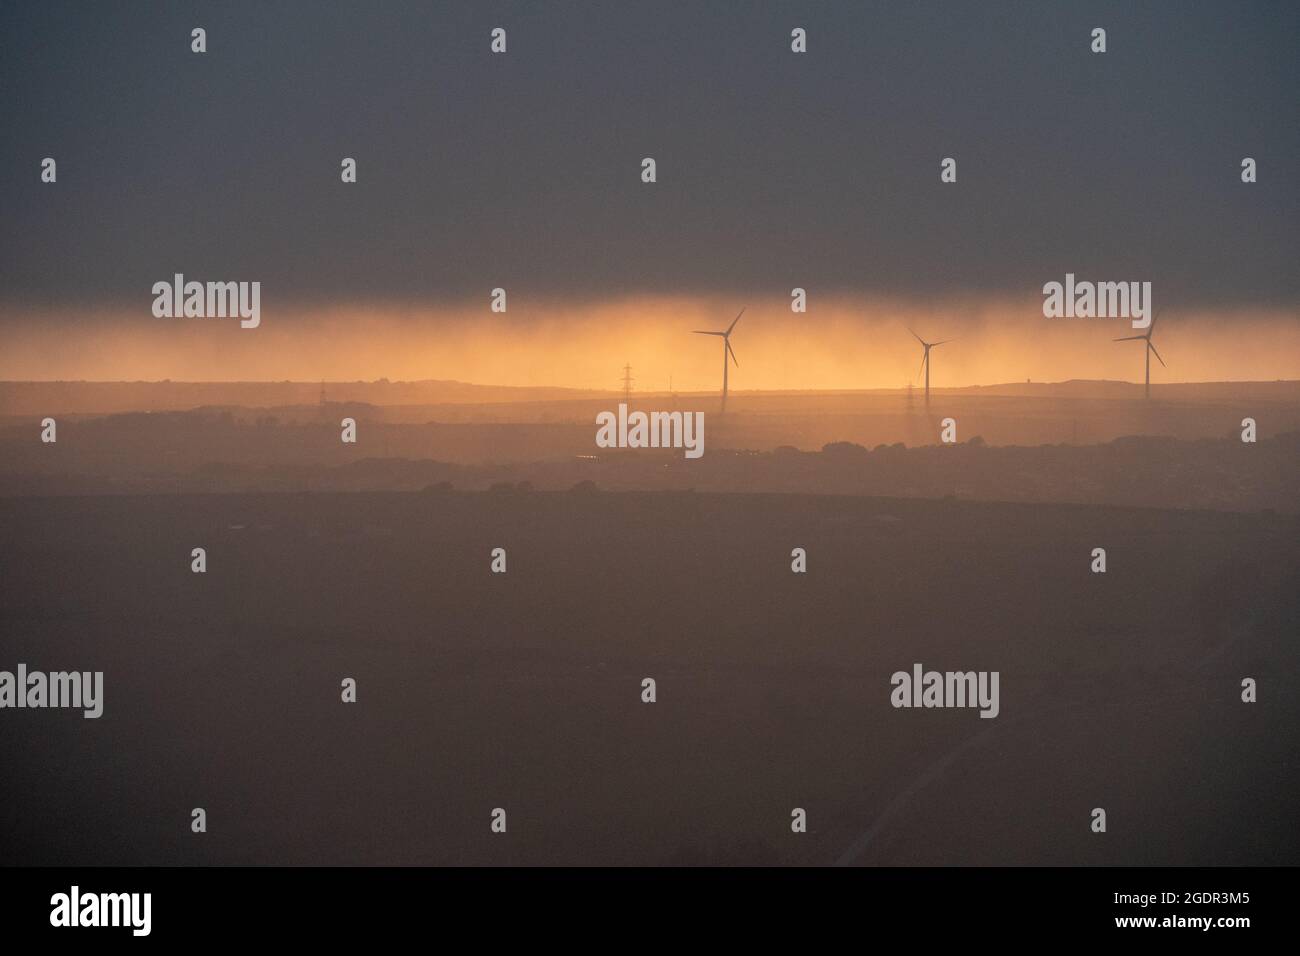 A line of wind turbines catching the late evening sun under dark and moody clouds Stock Photo